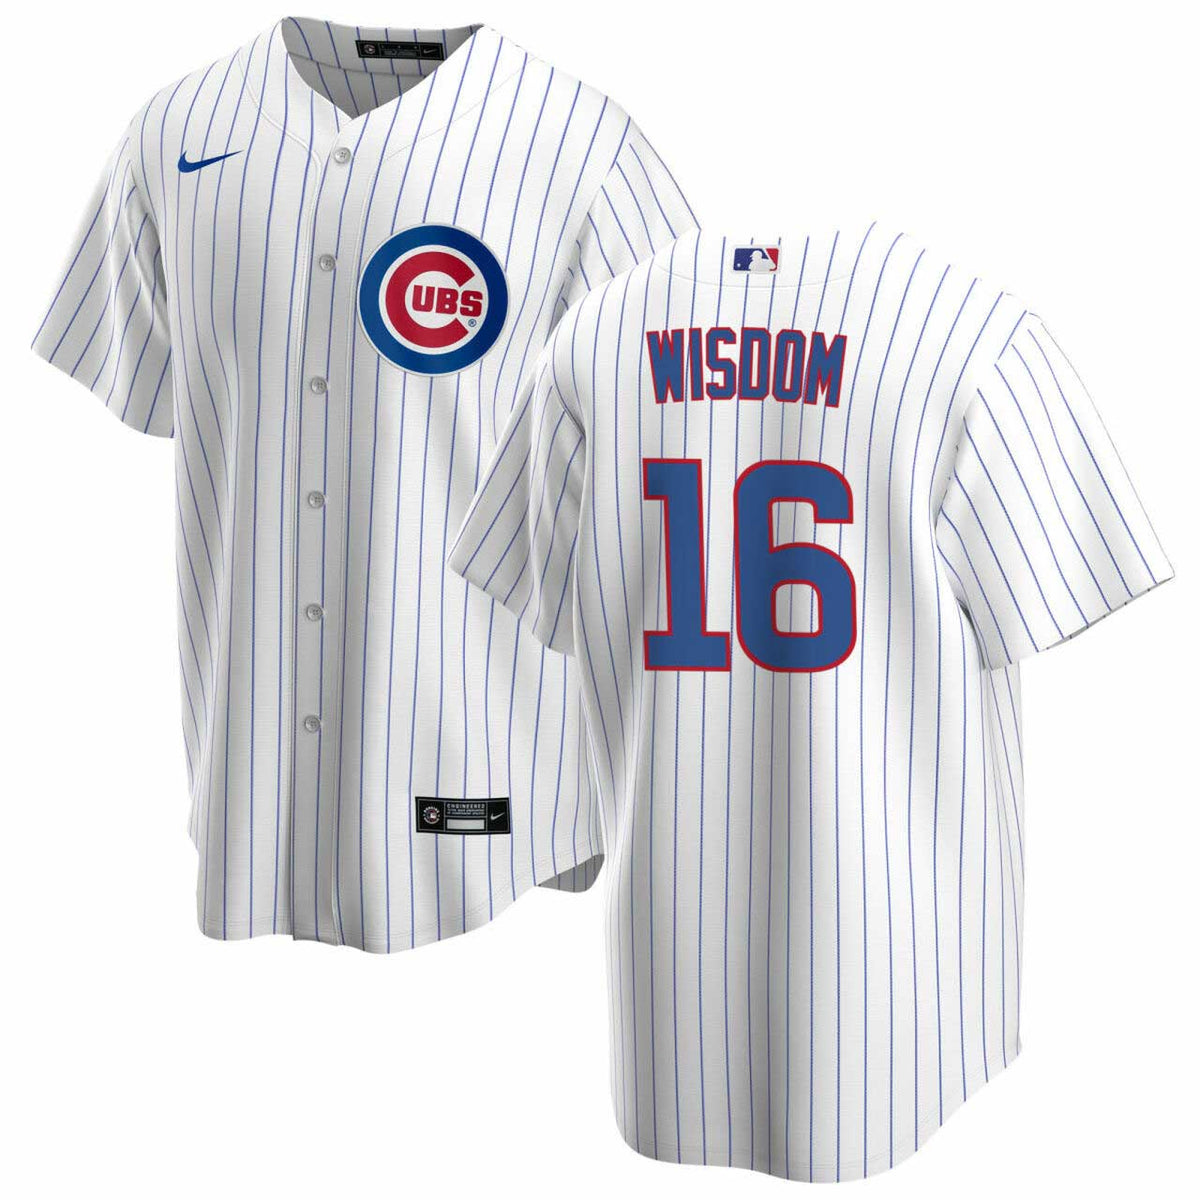 Youth Patrick Wisdom Royal Chicago Cubs Player T-Shirt Size: 2XL